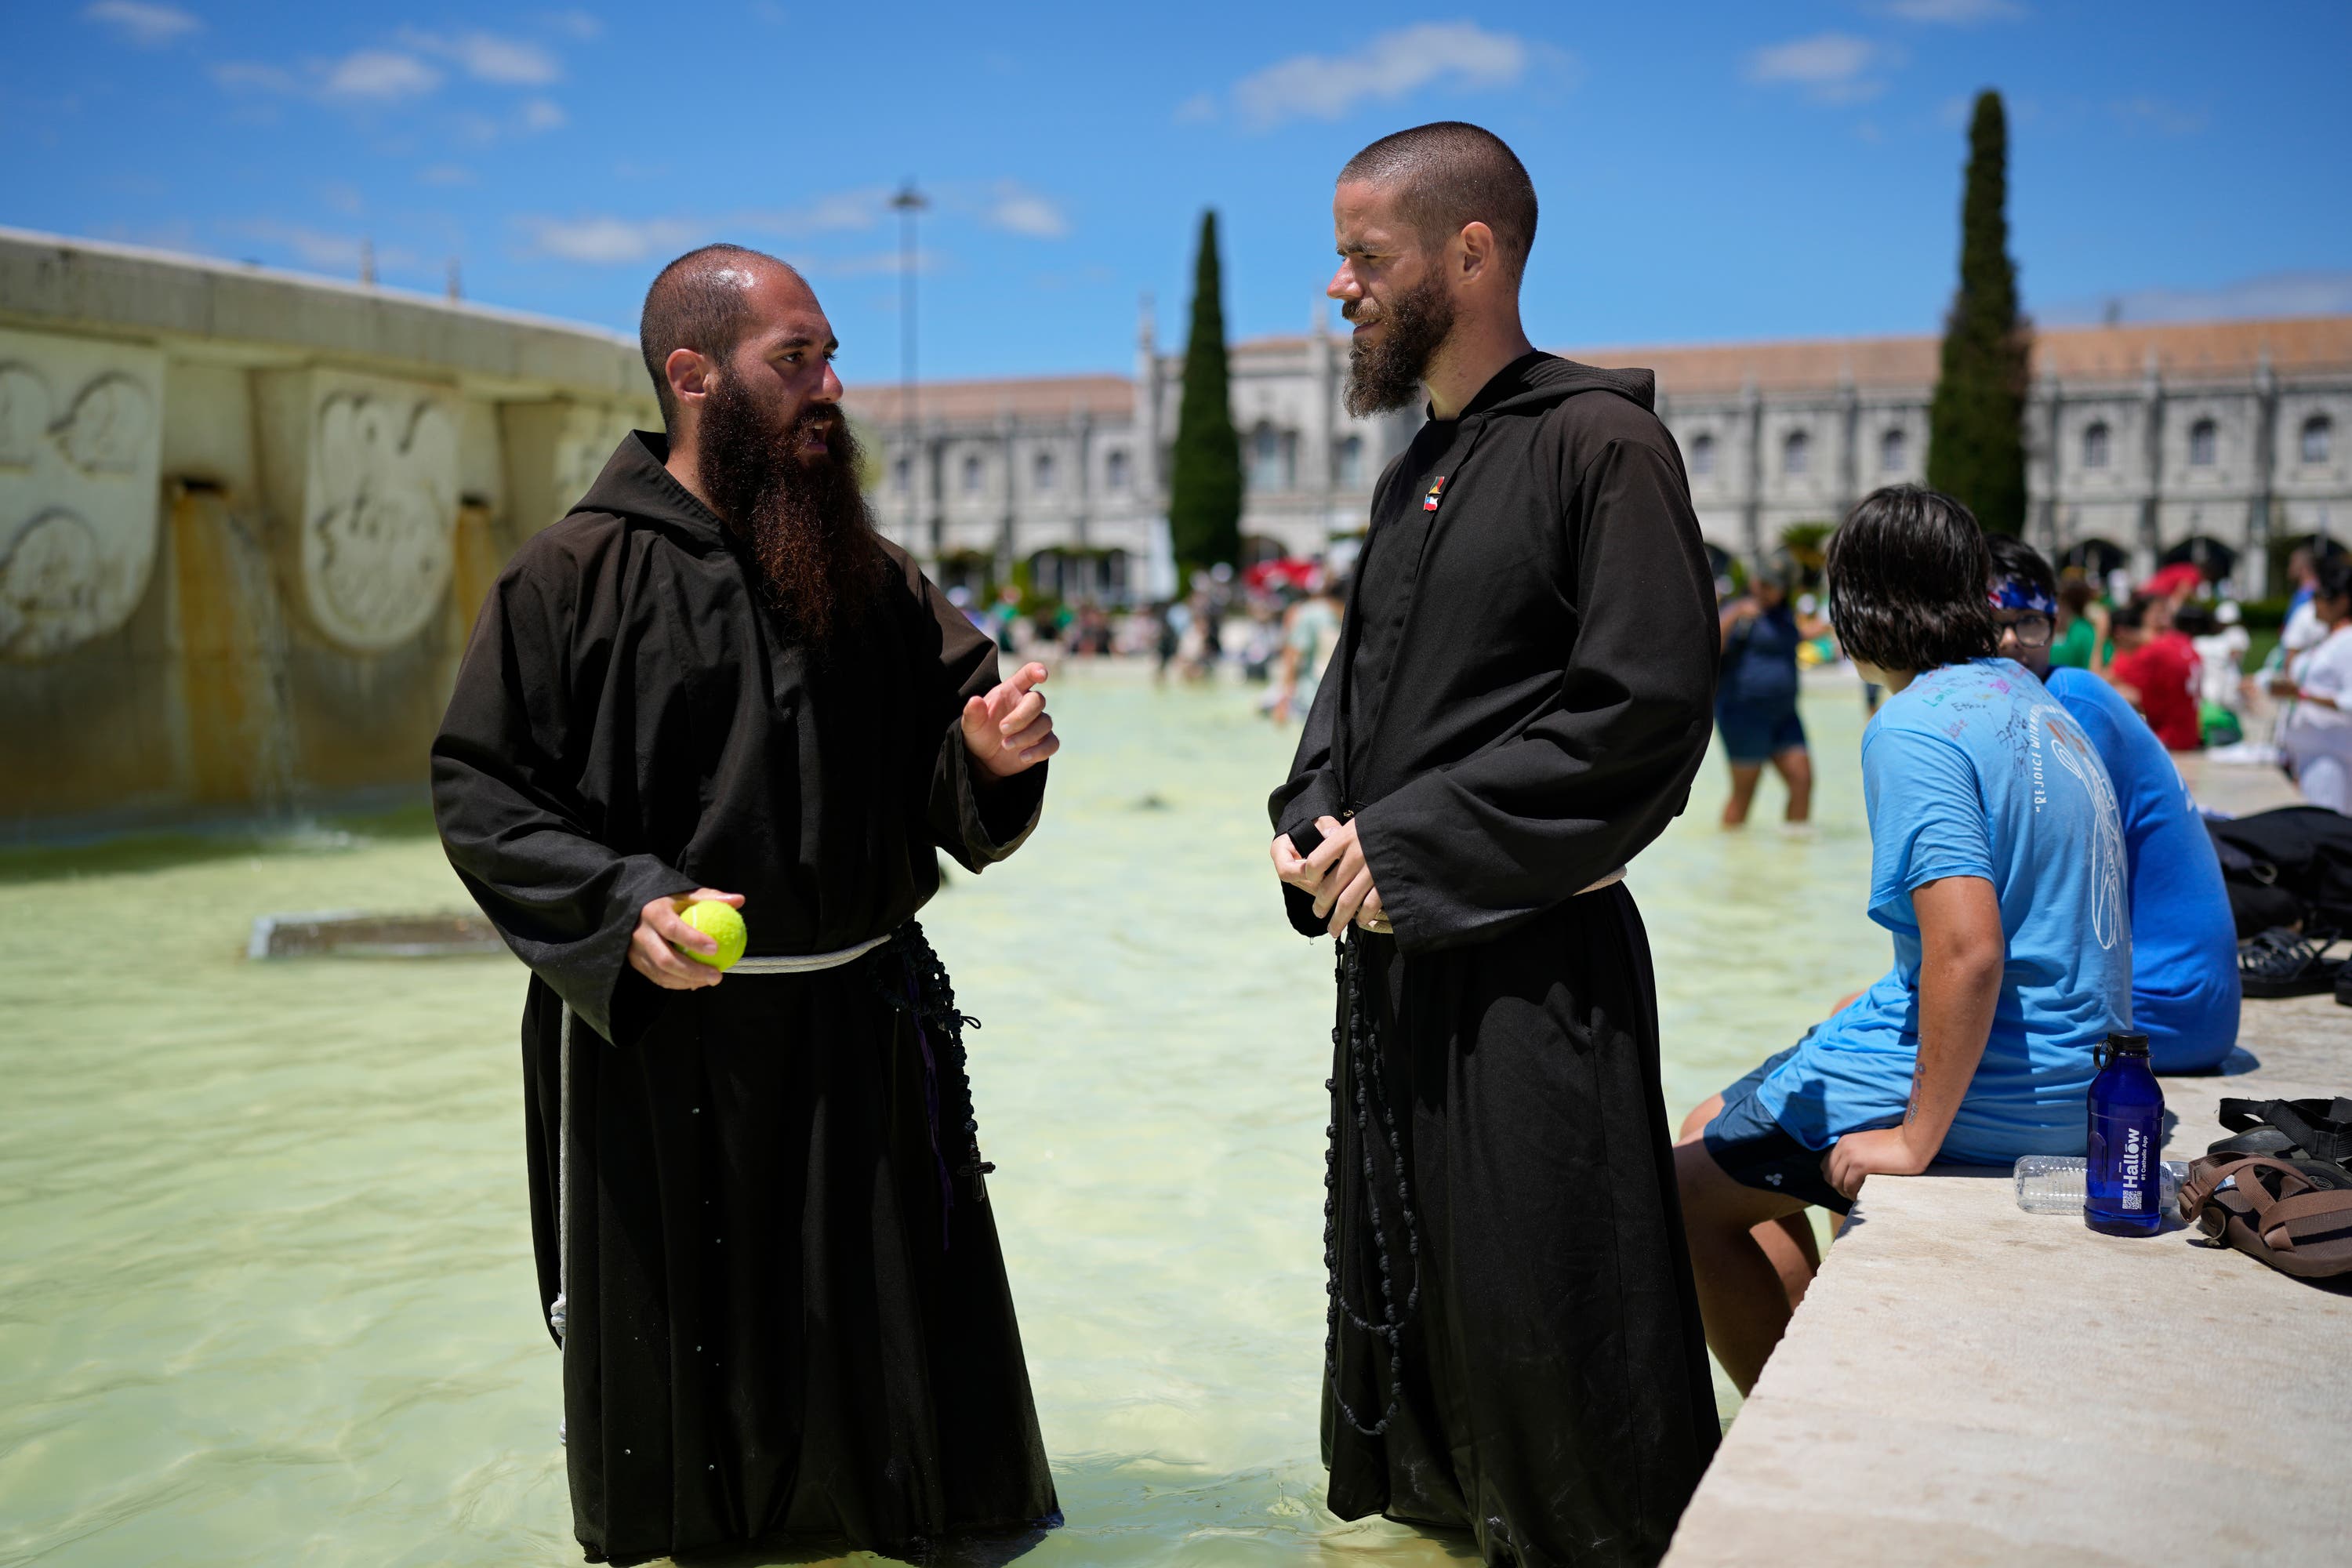 Two priests in front of the Jeronimos Monastery where Pope Francis visited.